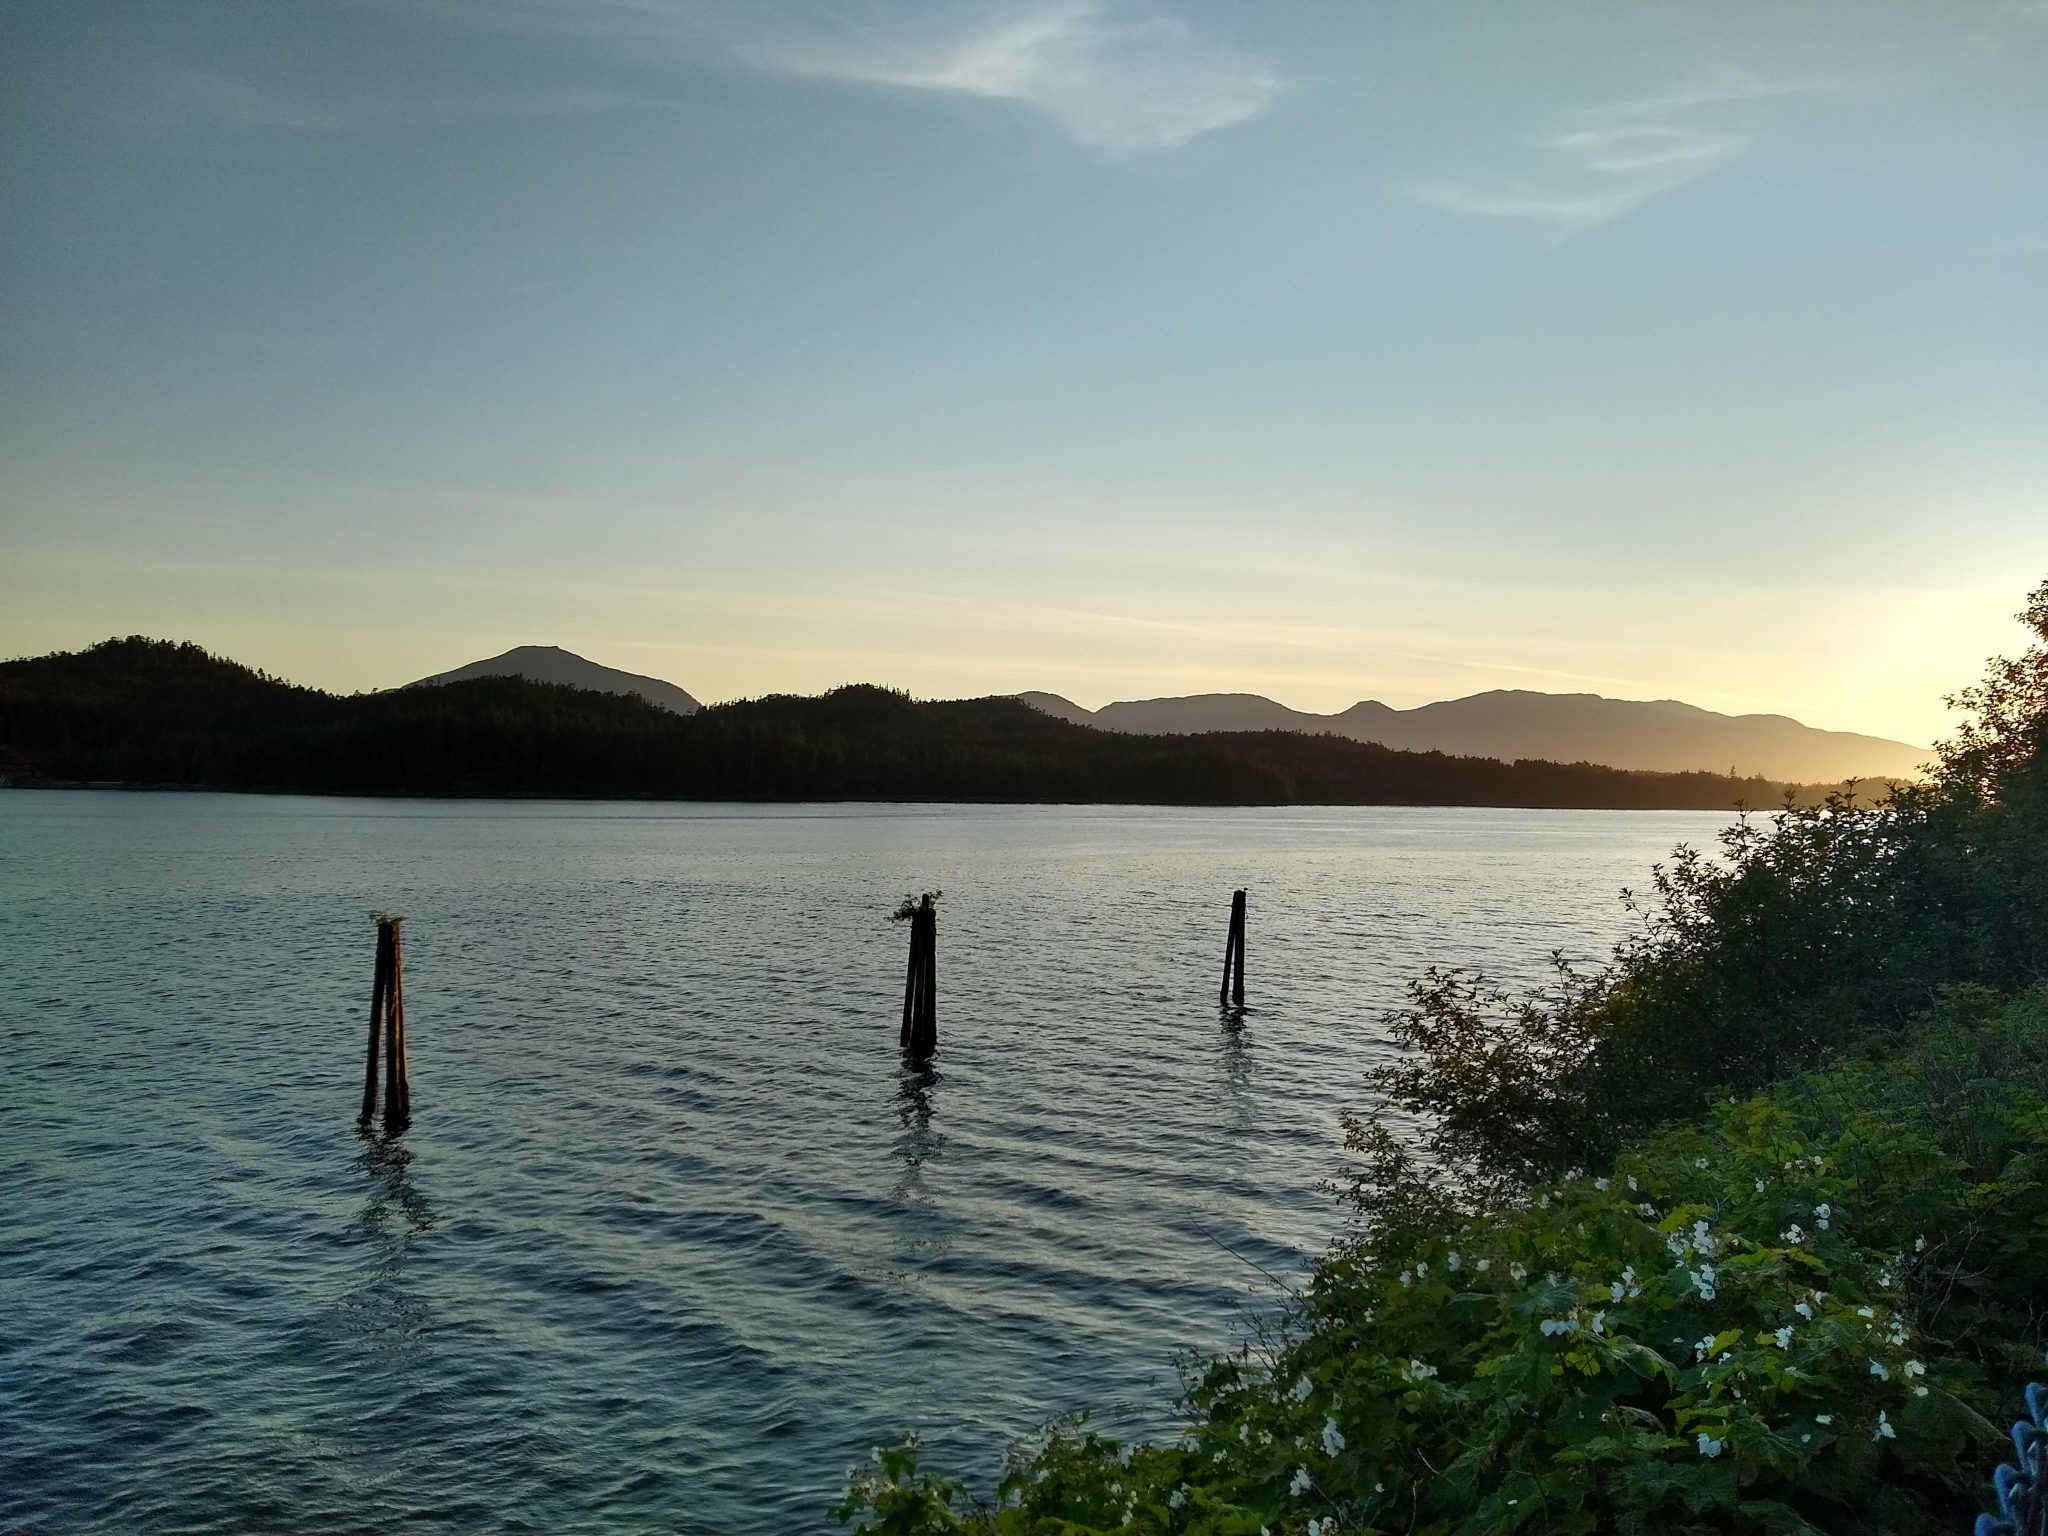 A sunset behind forested hills along the water. In the foreground are three pilings in the water